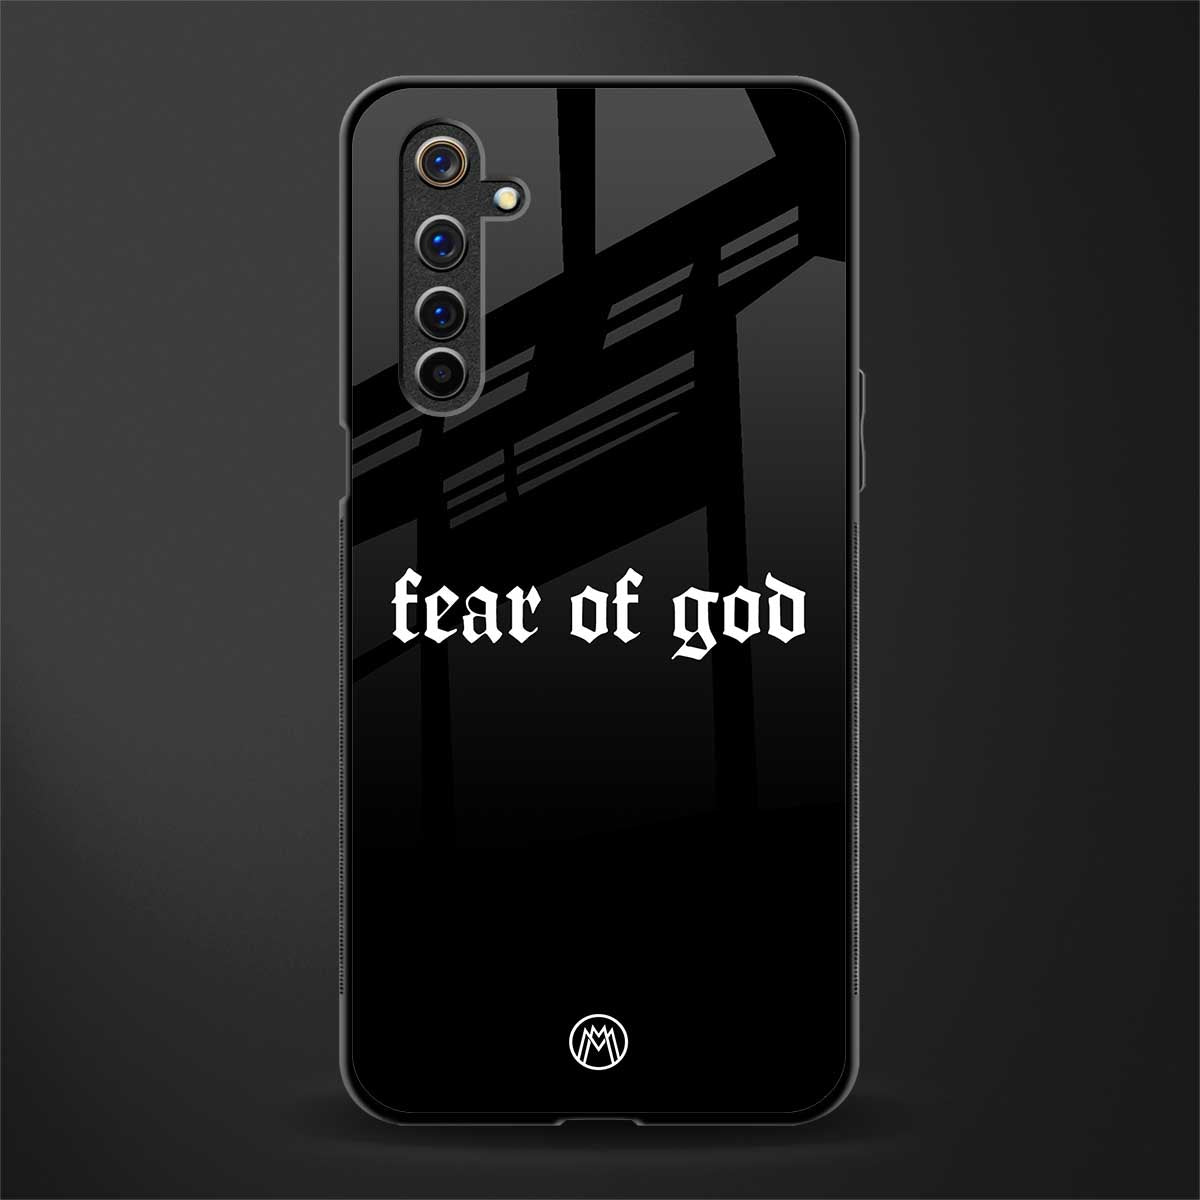 fear of god phone cover for realme 6 pro